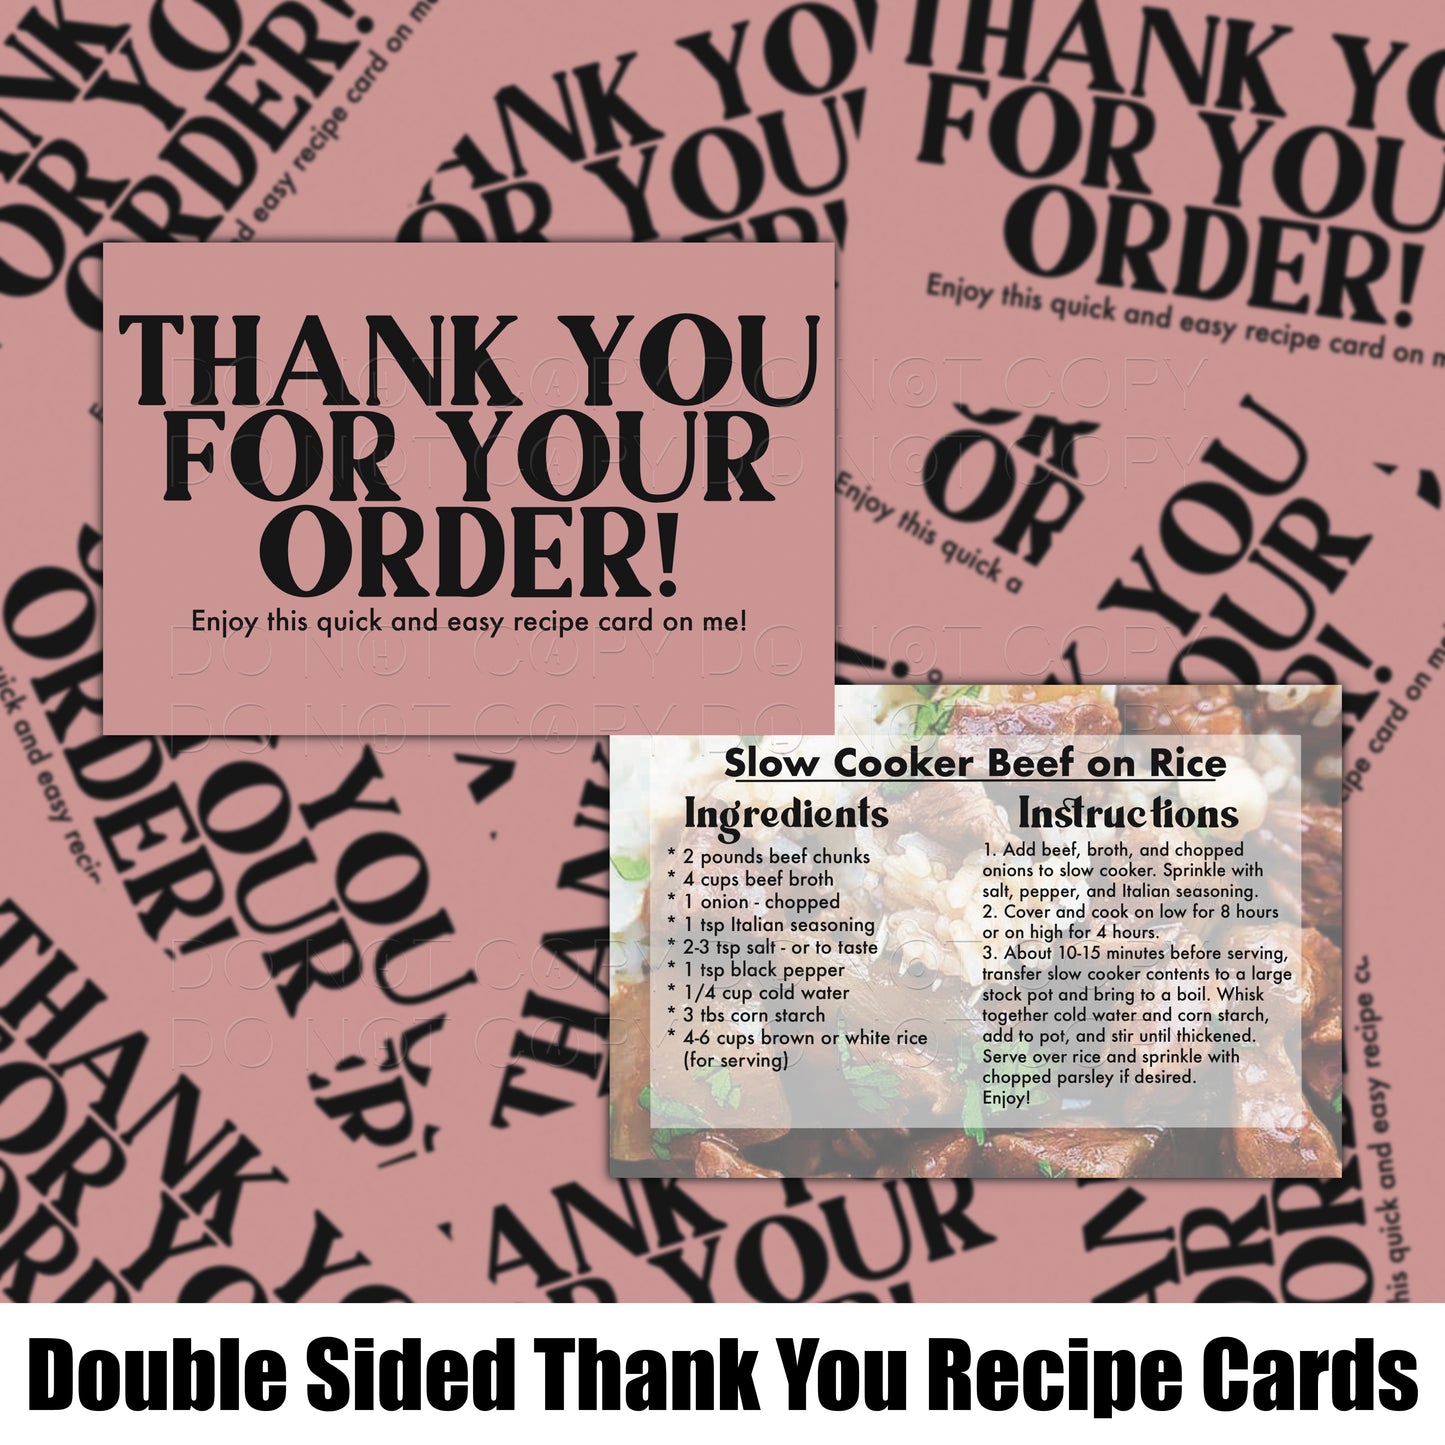 RECIPE THANK YOU CARDS - PACK OF 50 - SLOW COOKER BEEF ON RICE #4010